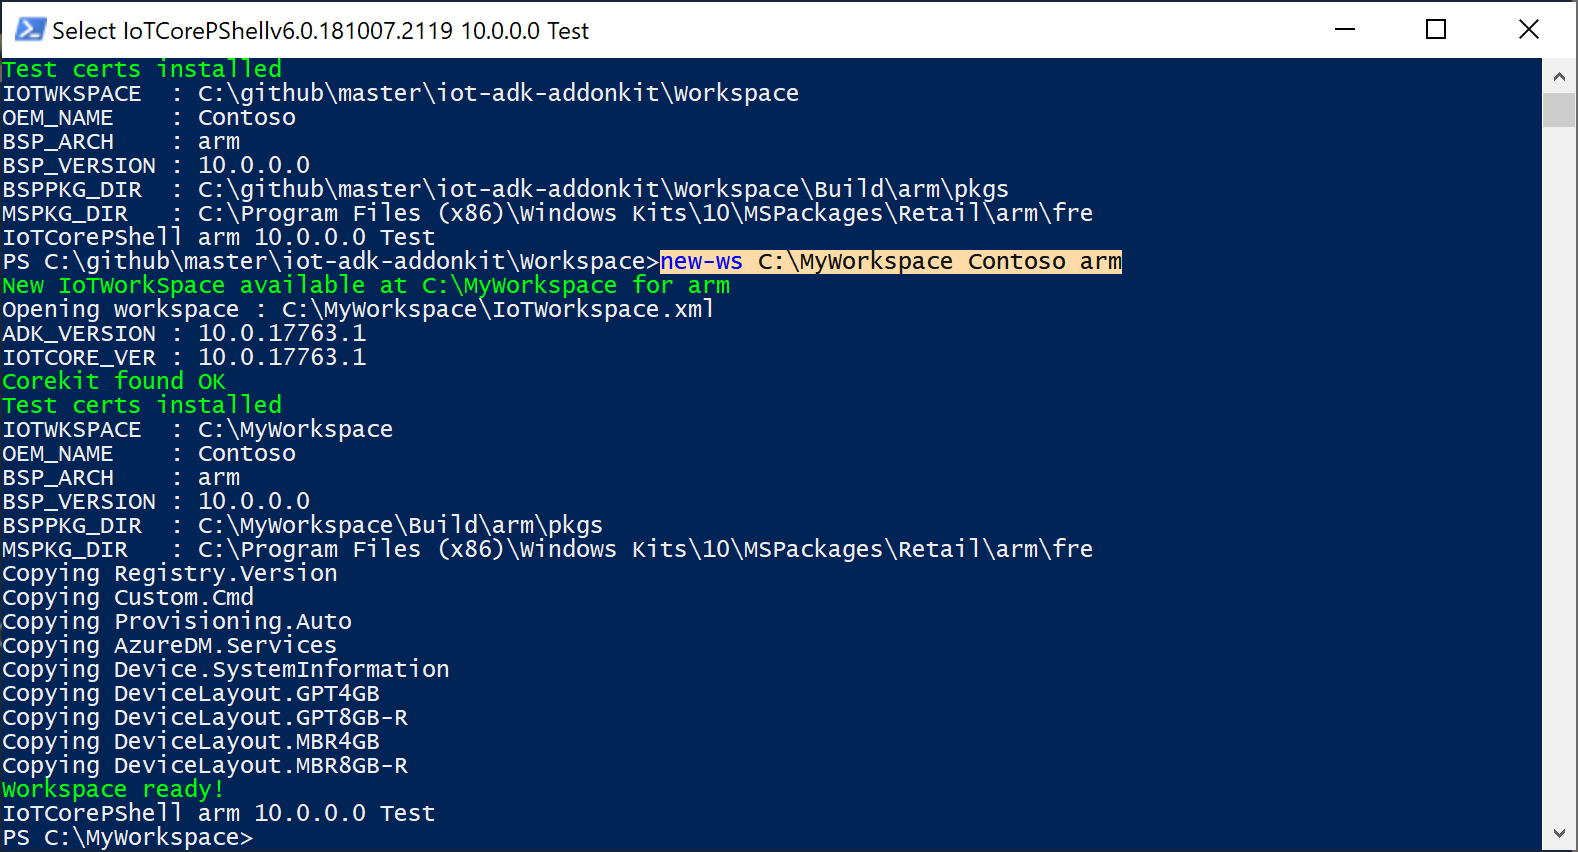 PowerShell session showing setup of new IoTWorkSpace